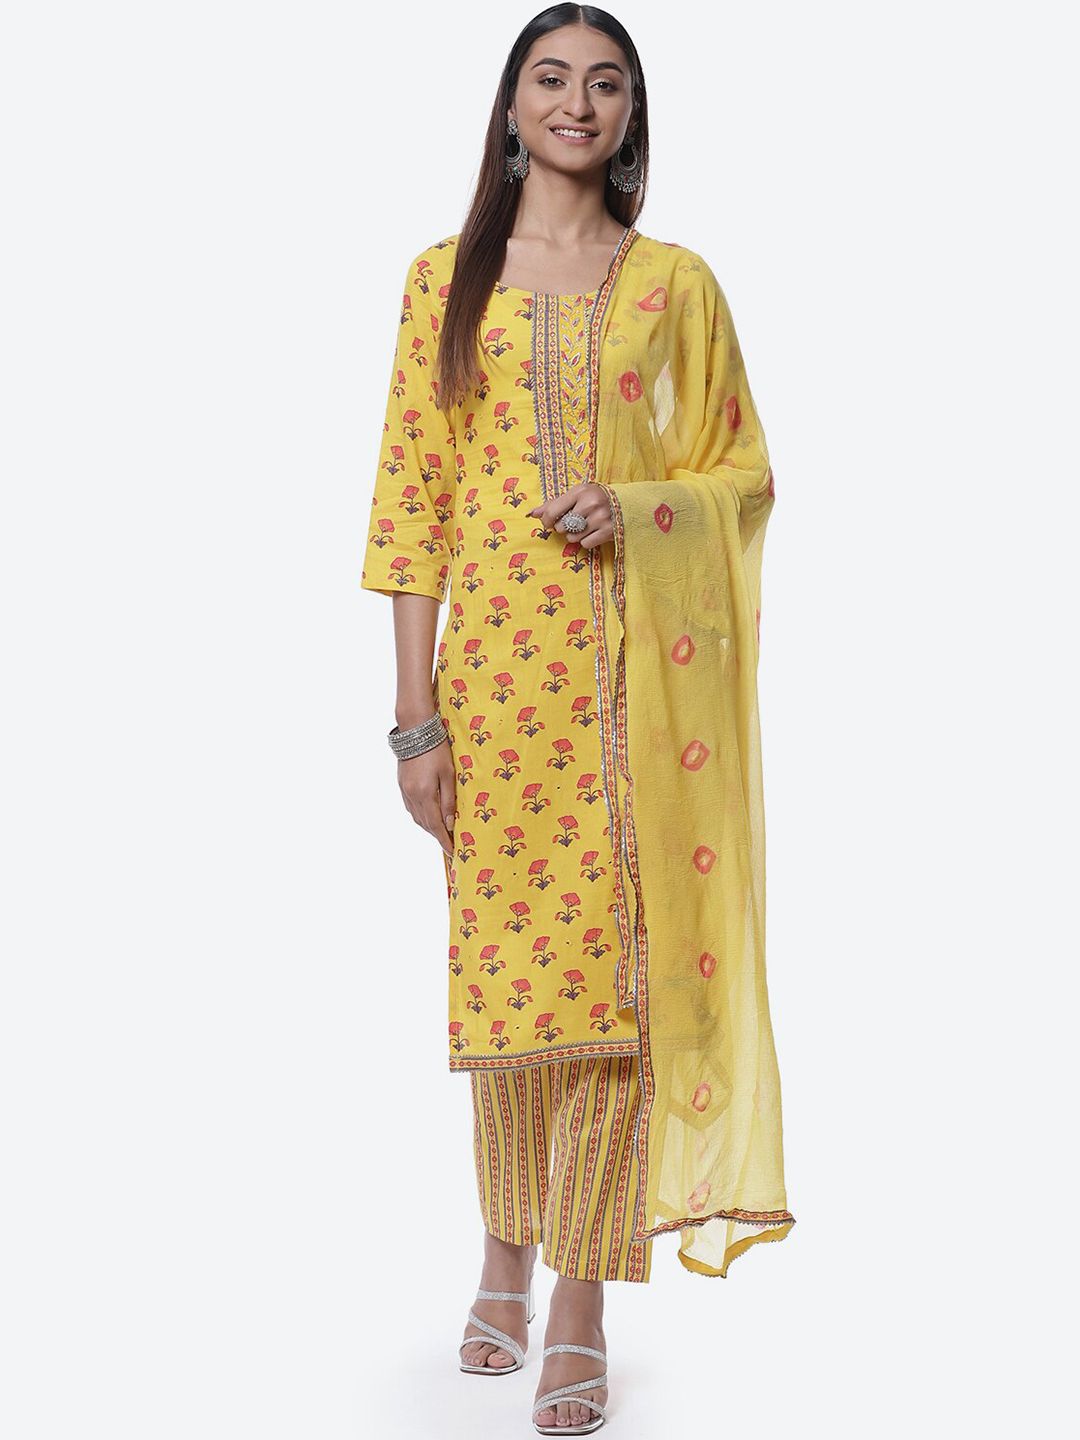 Biba Yellow & Red Printed Pure Cotton Unstitched Dress Material With Dupatta Price in India